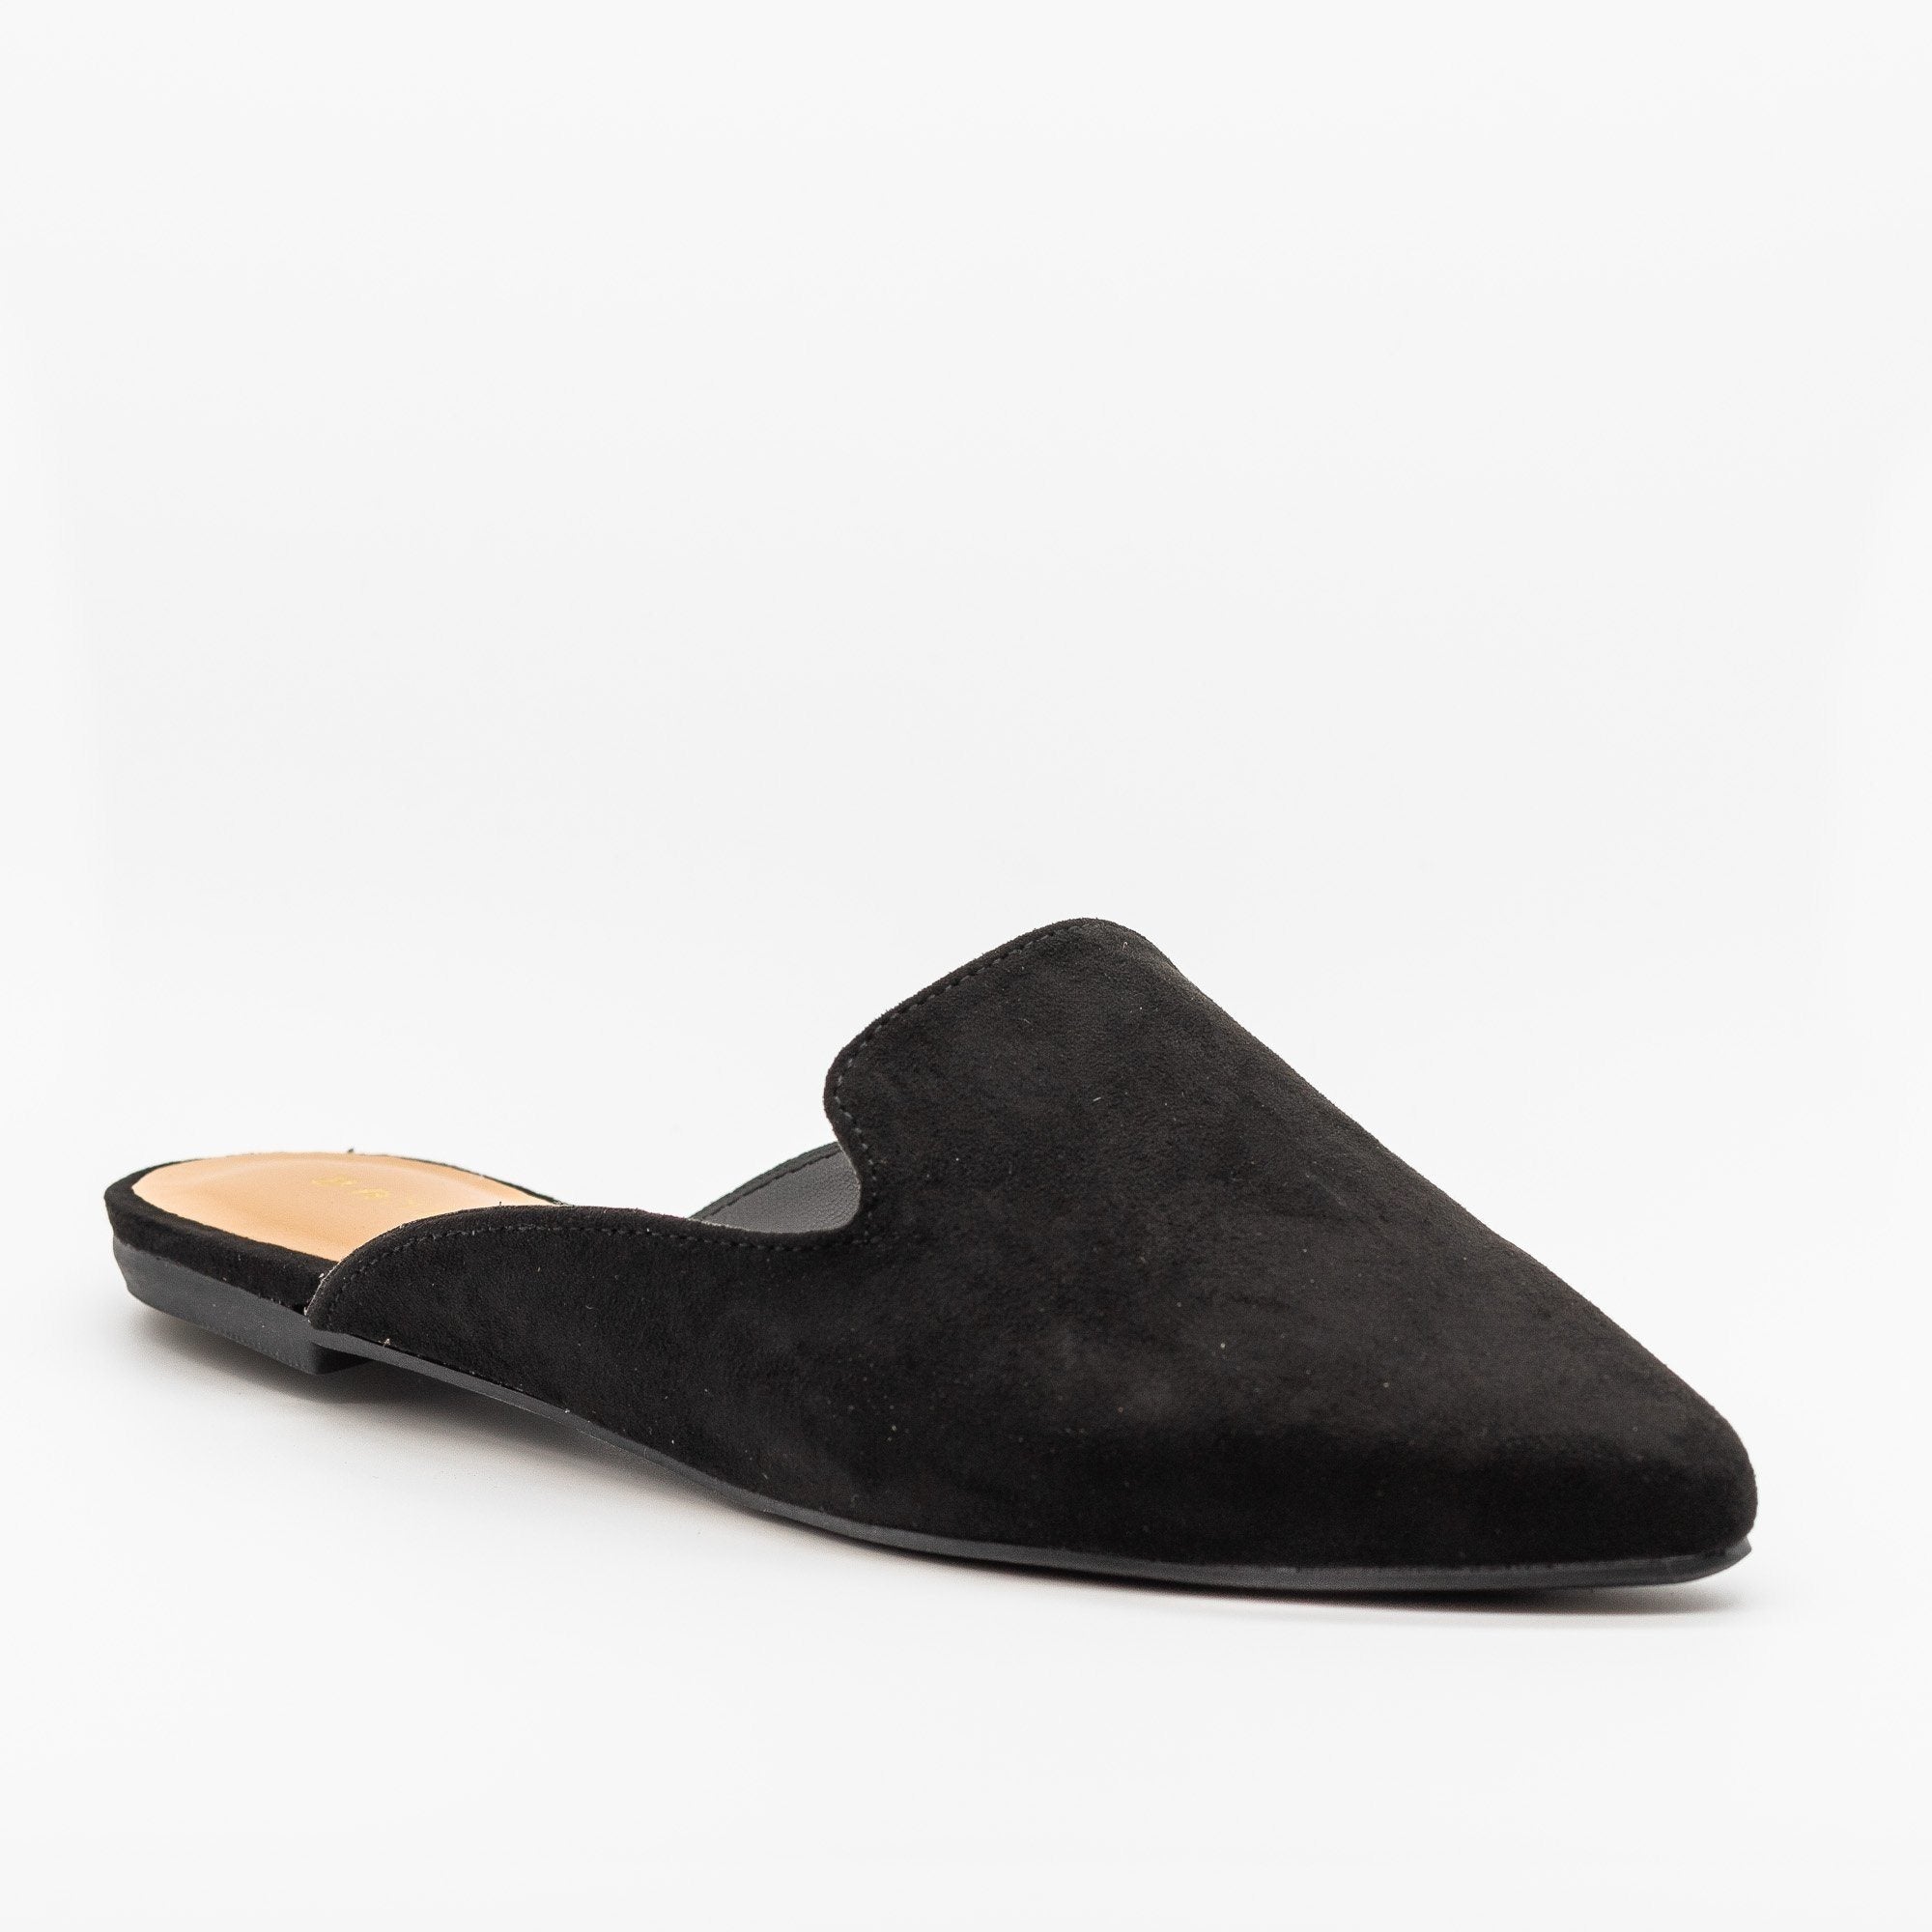 pointed toe loafer mules